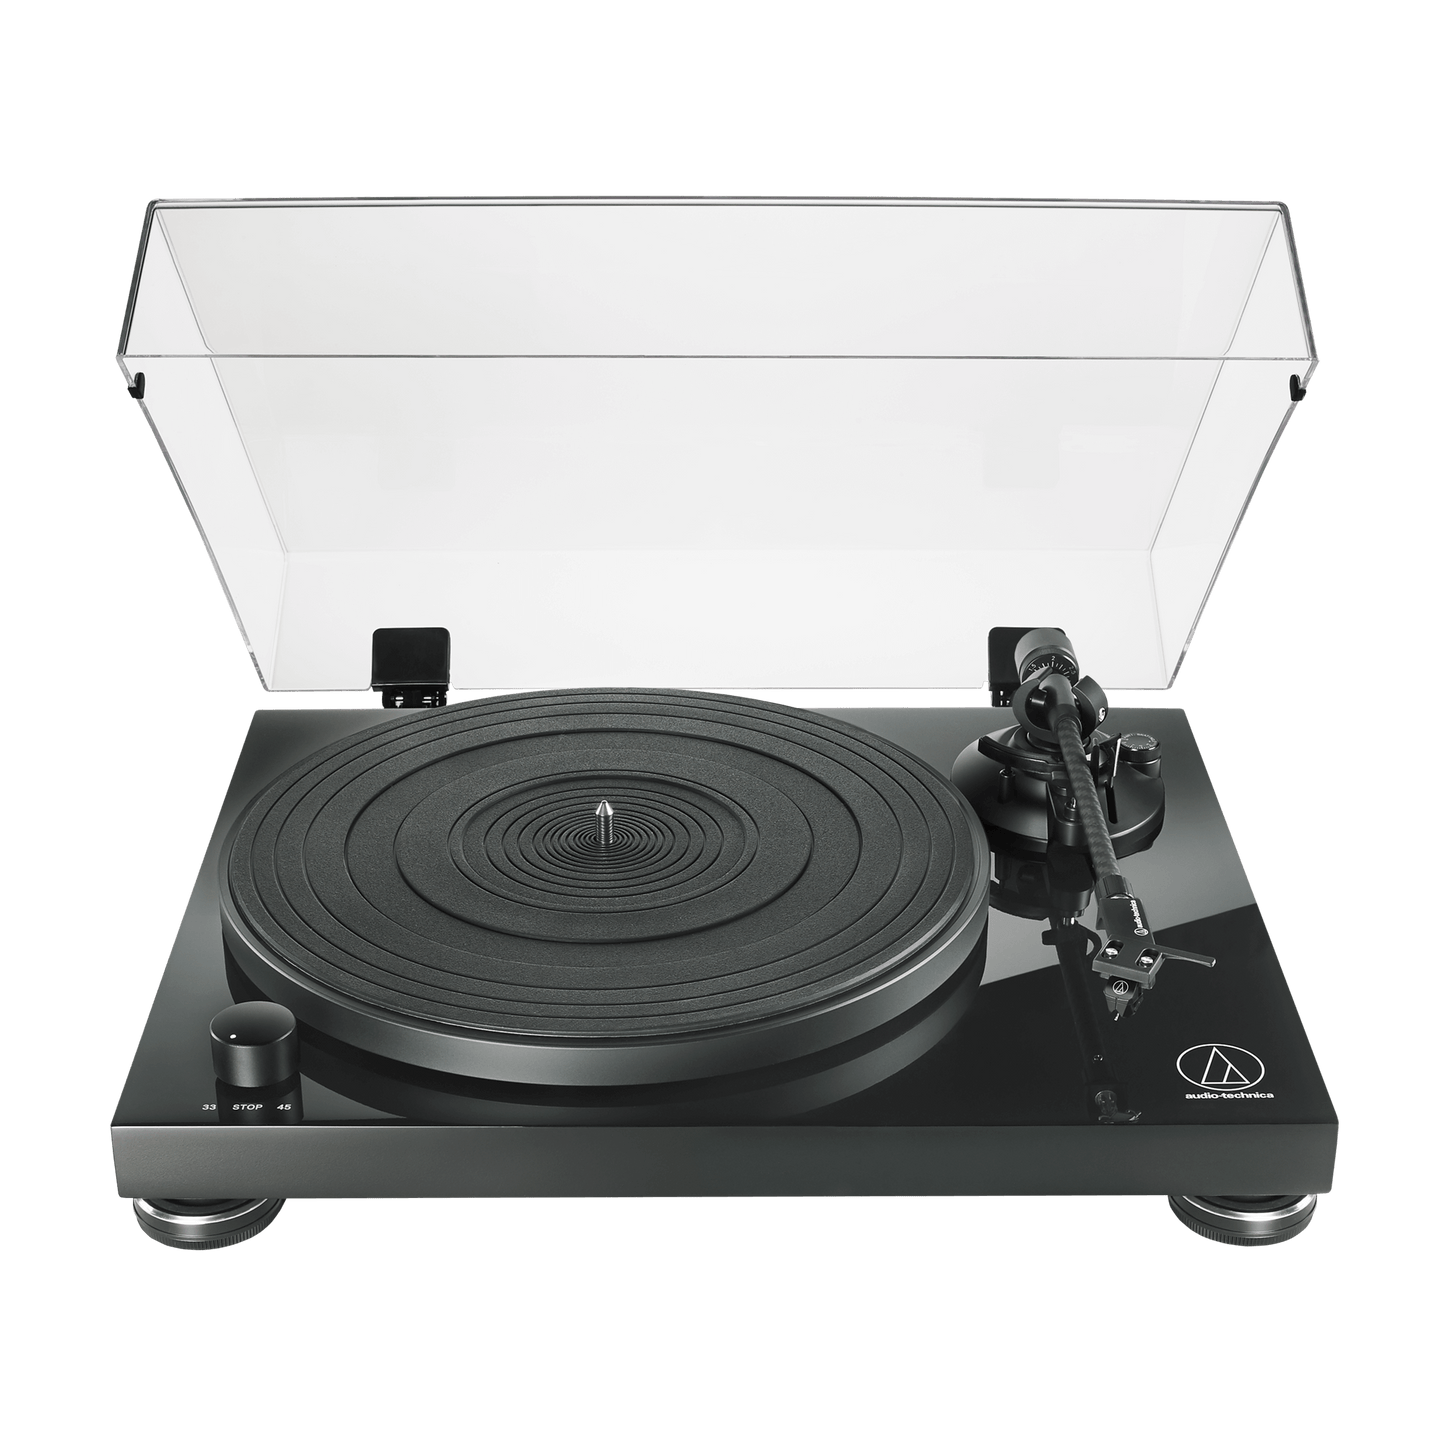 Audio-Technica AT-LP140XP Professional Direct Drive Manual Turntable - Black